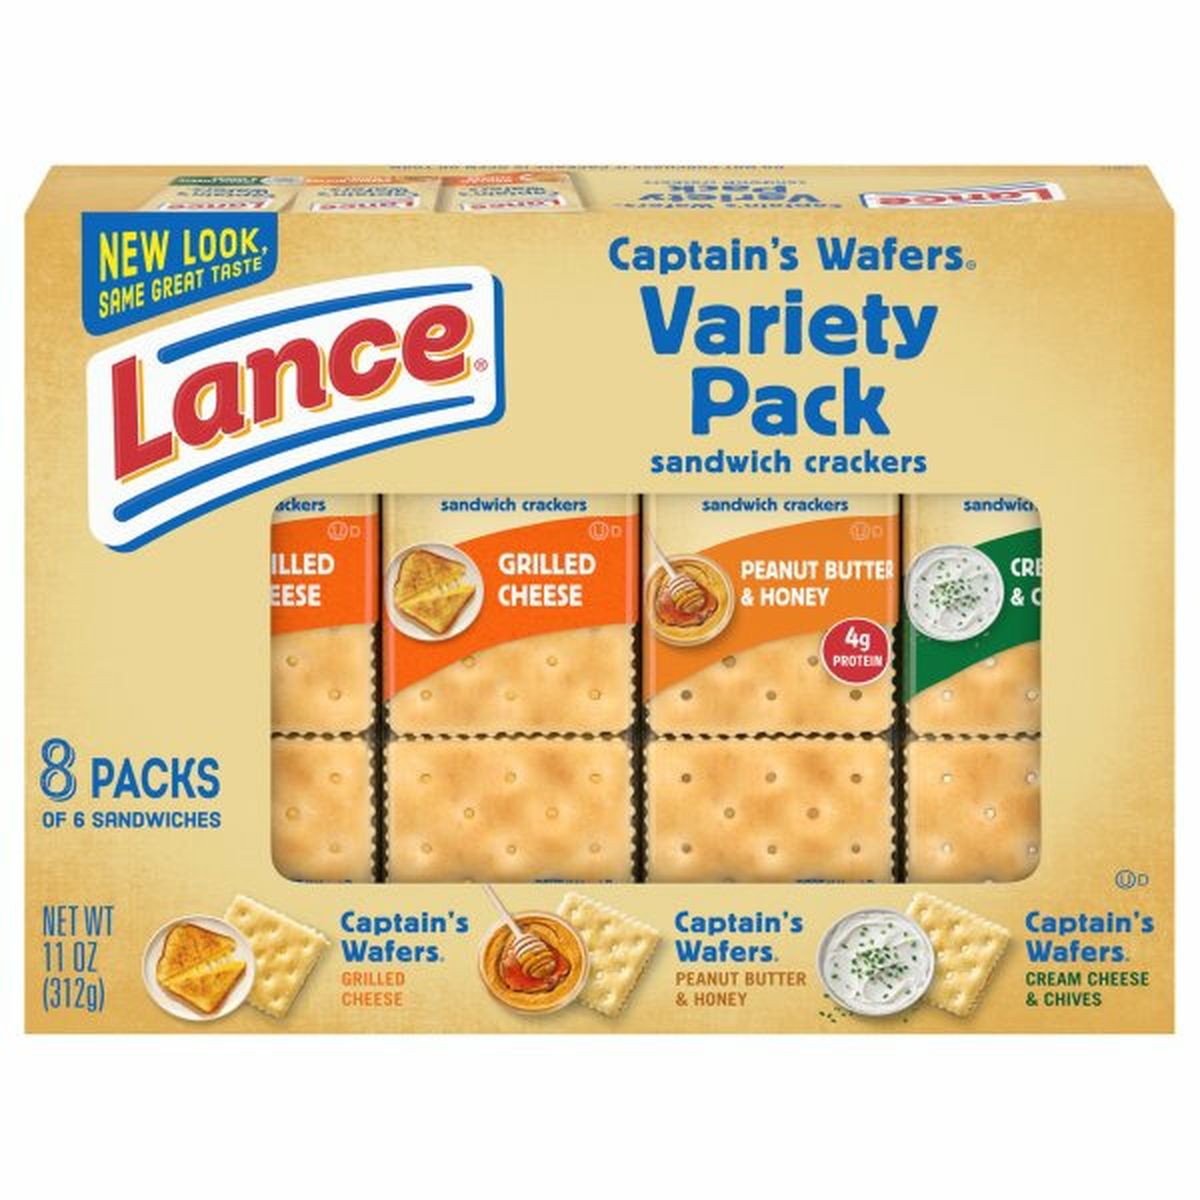 Calories in Lances Captain's Wafers Sandwich Crackers, Variety Pack